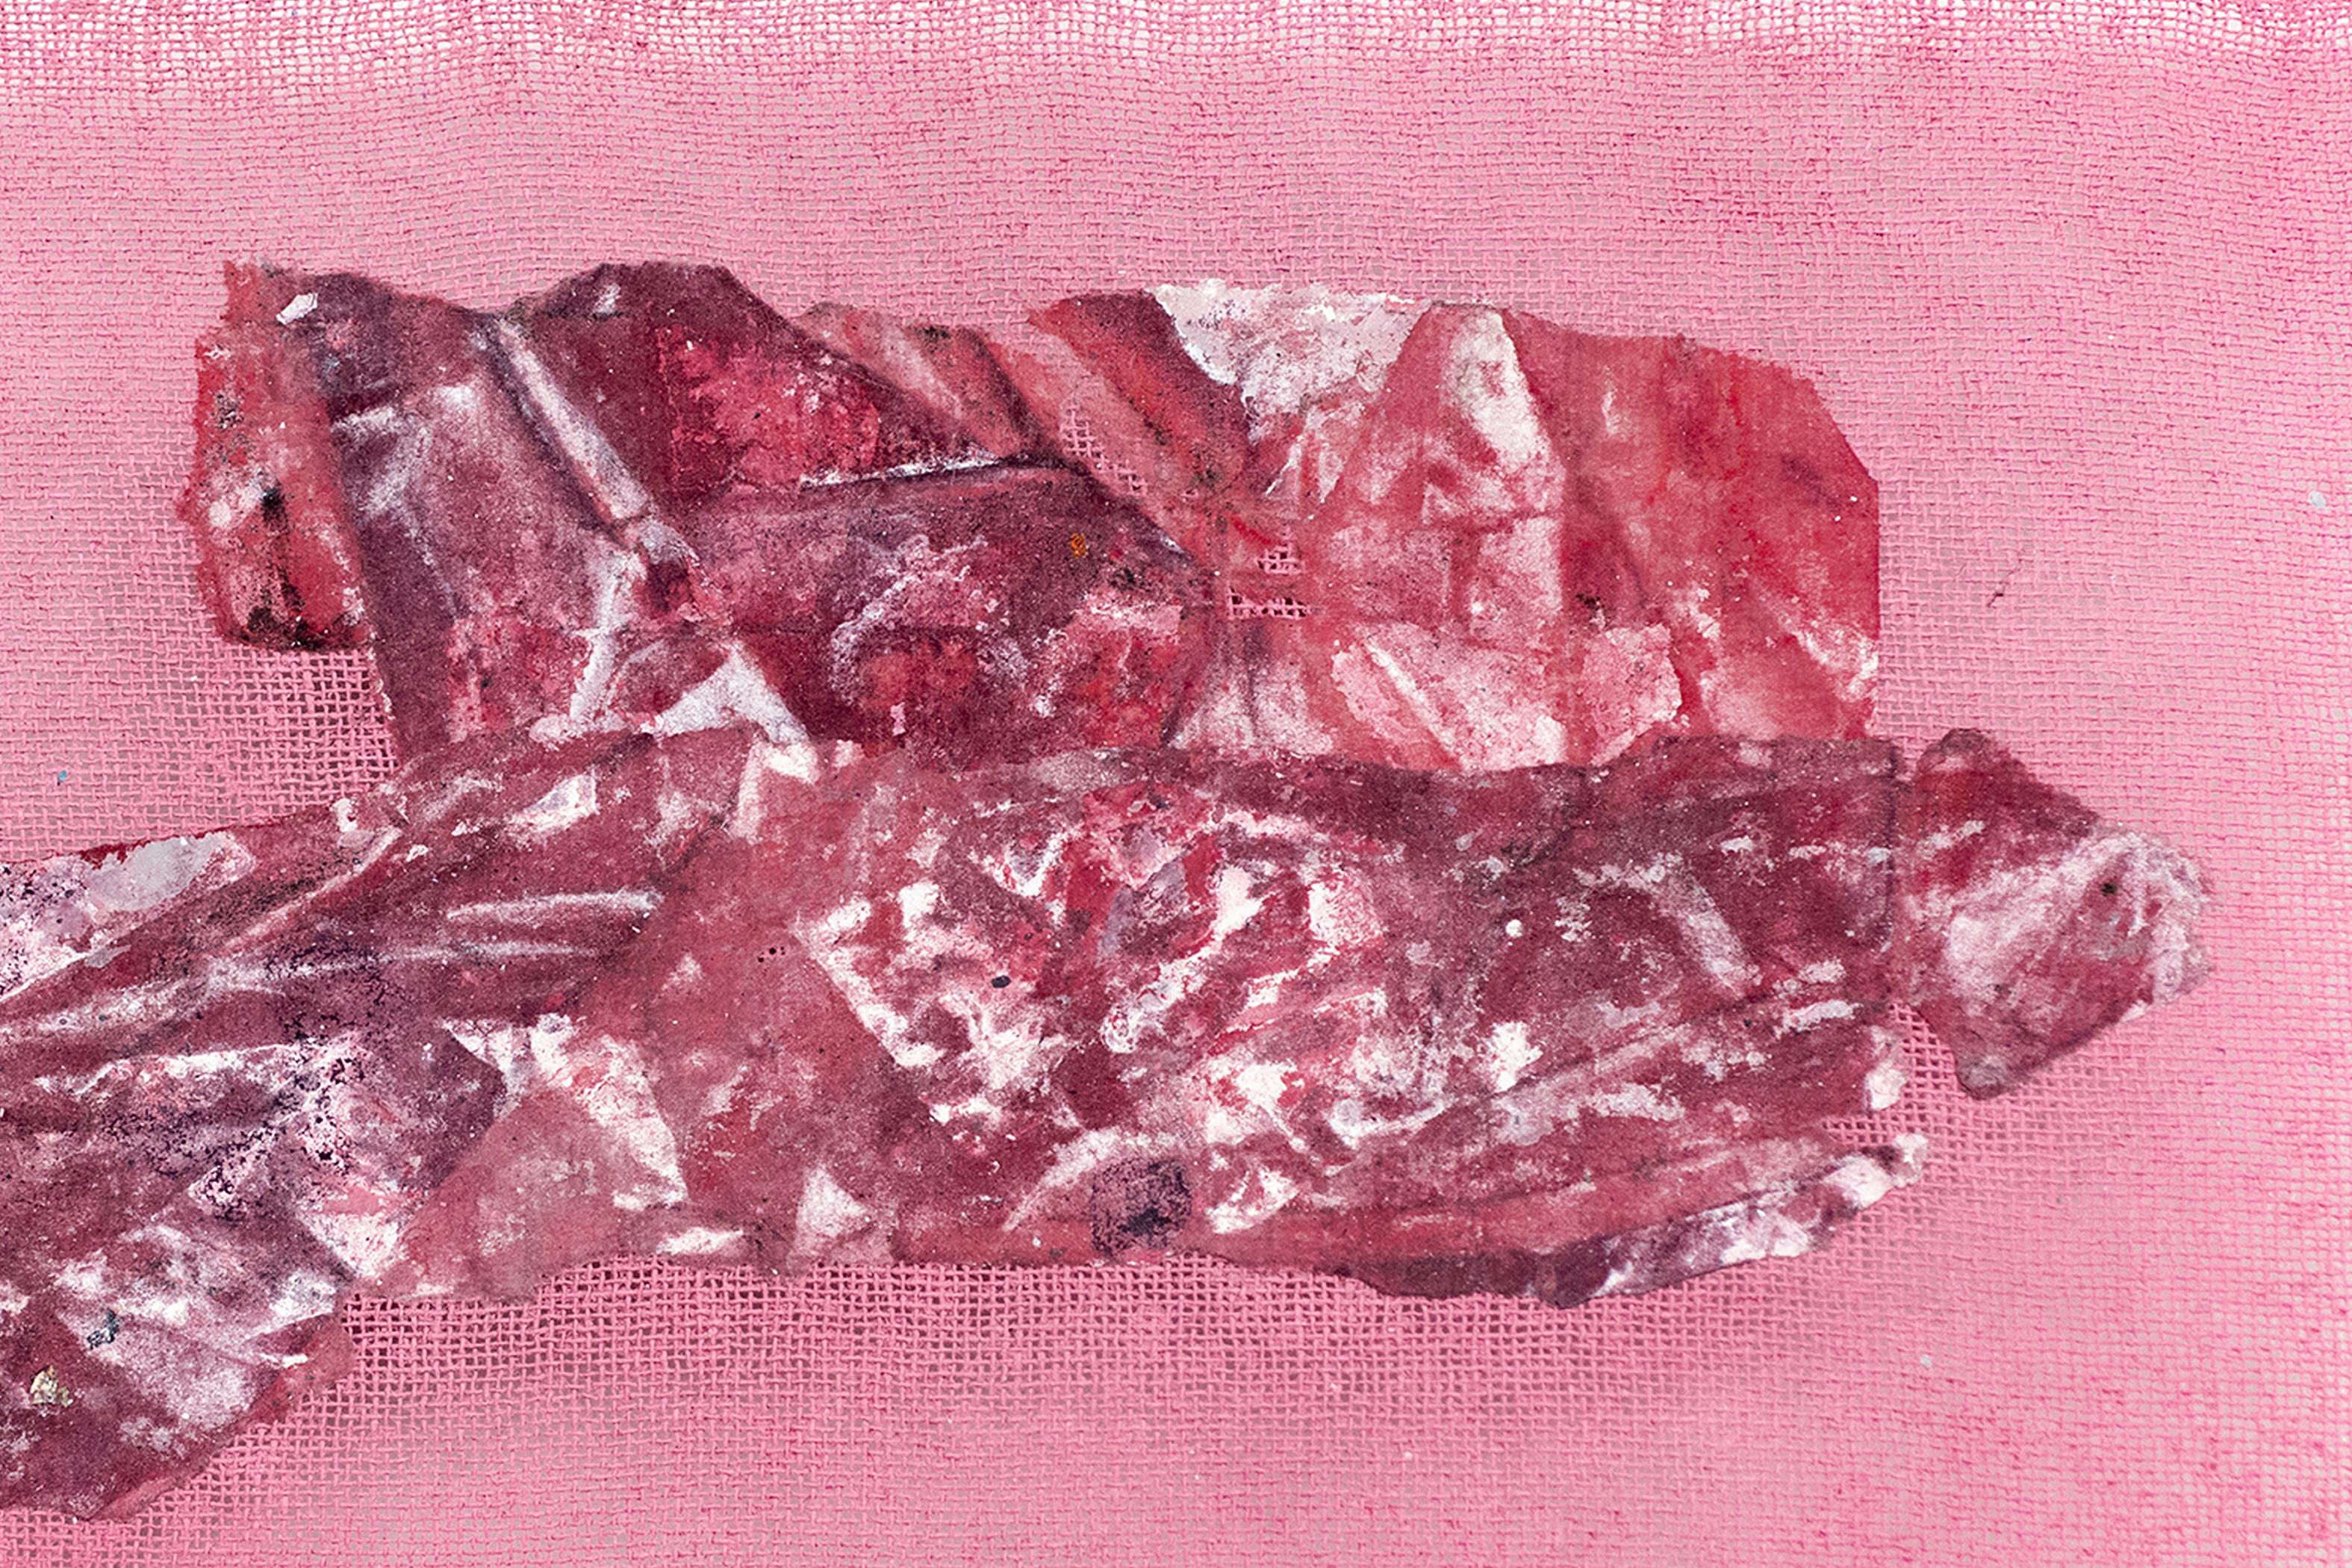 Flesh, Mulberry paper and acrylic on gauze For Sale 2